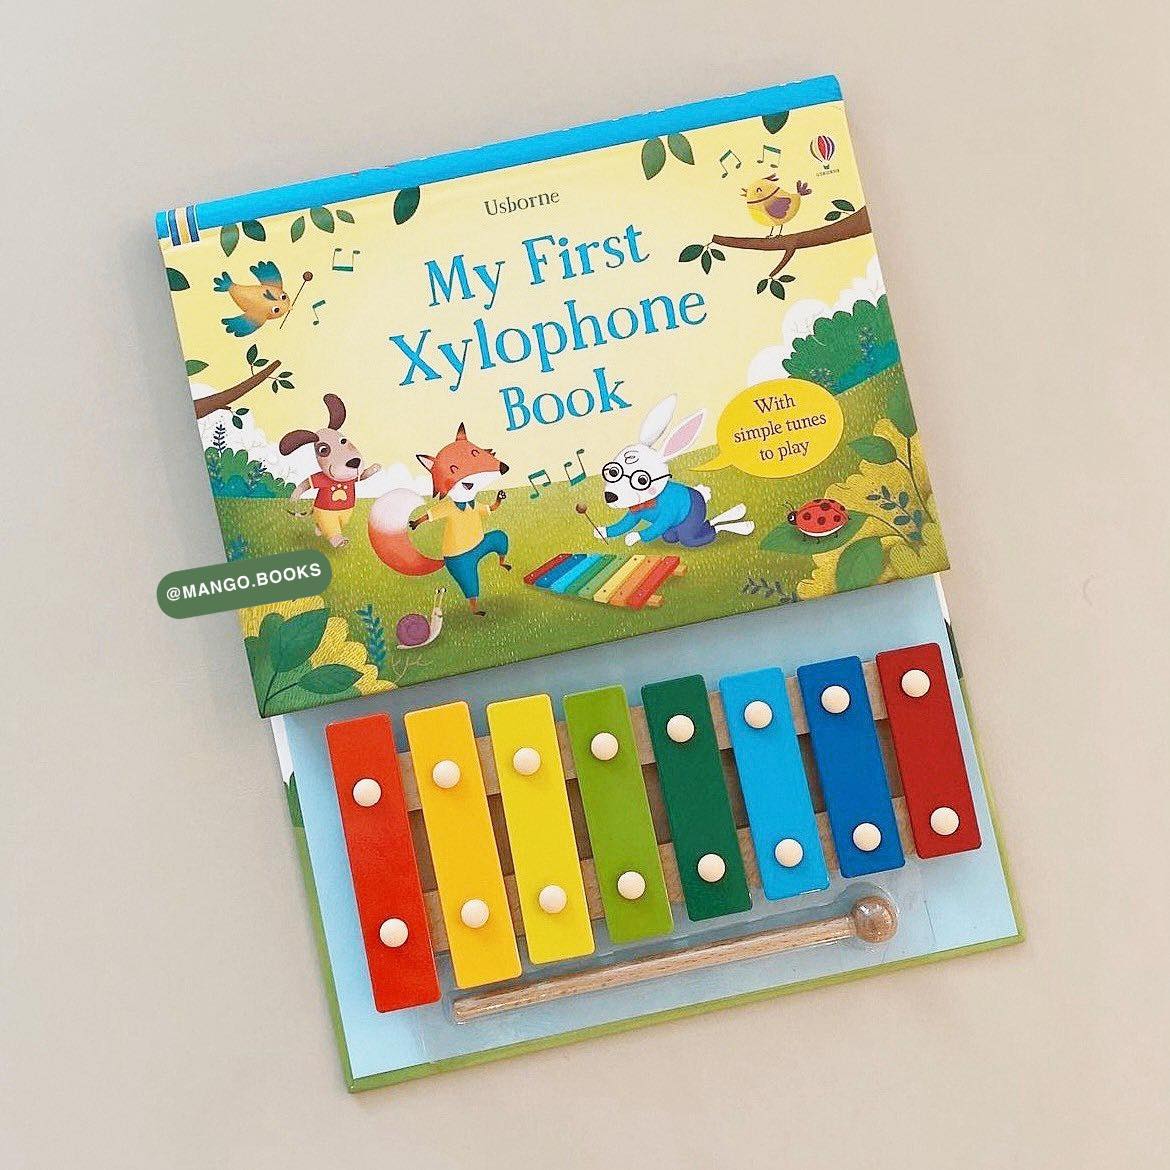 Sách My First Xylophone Book